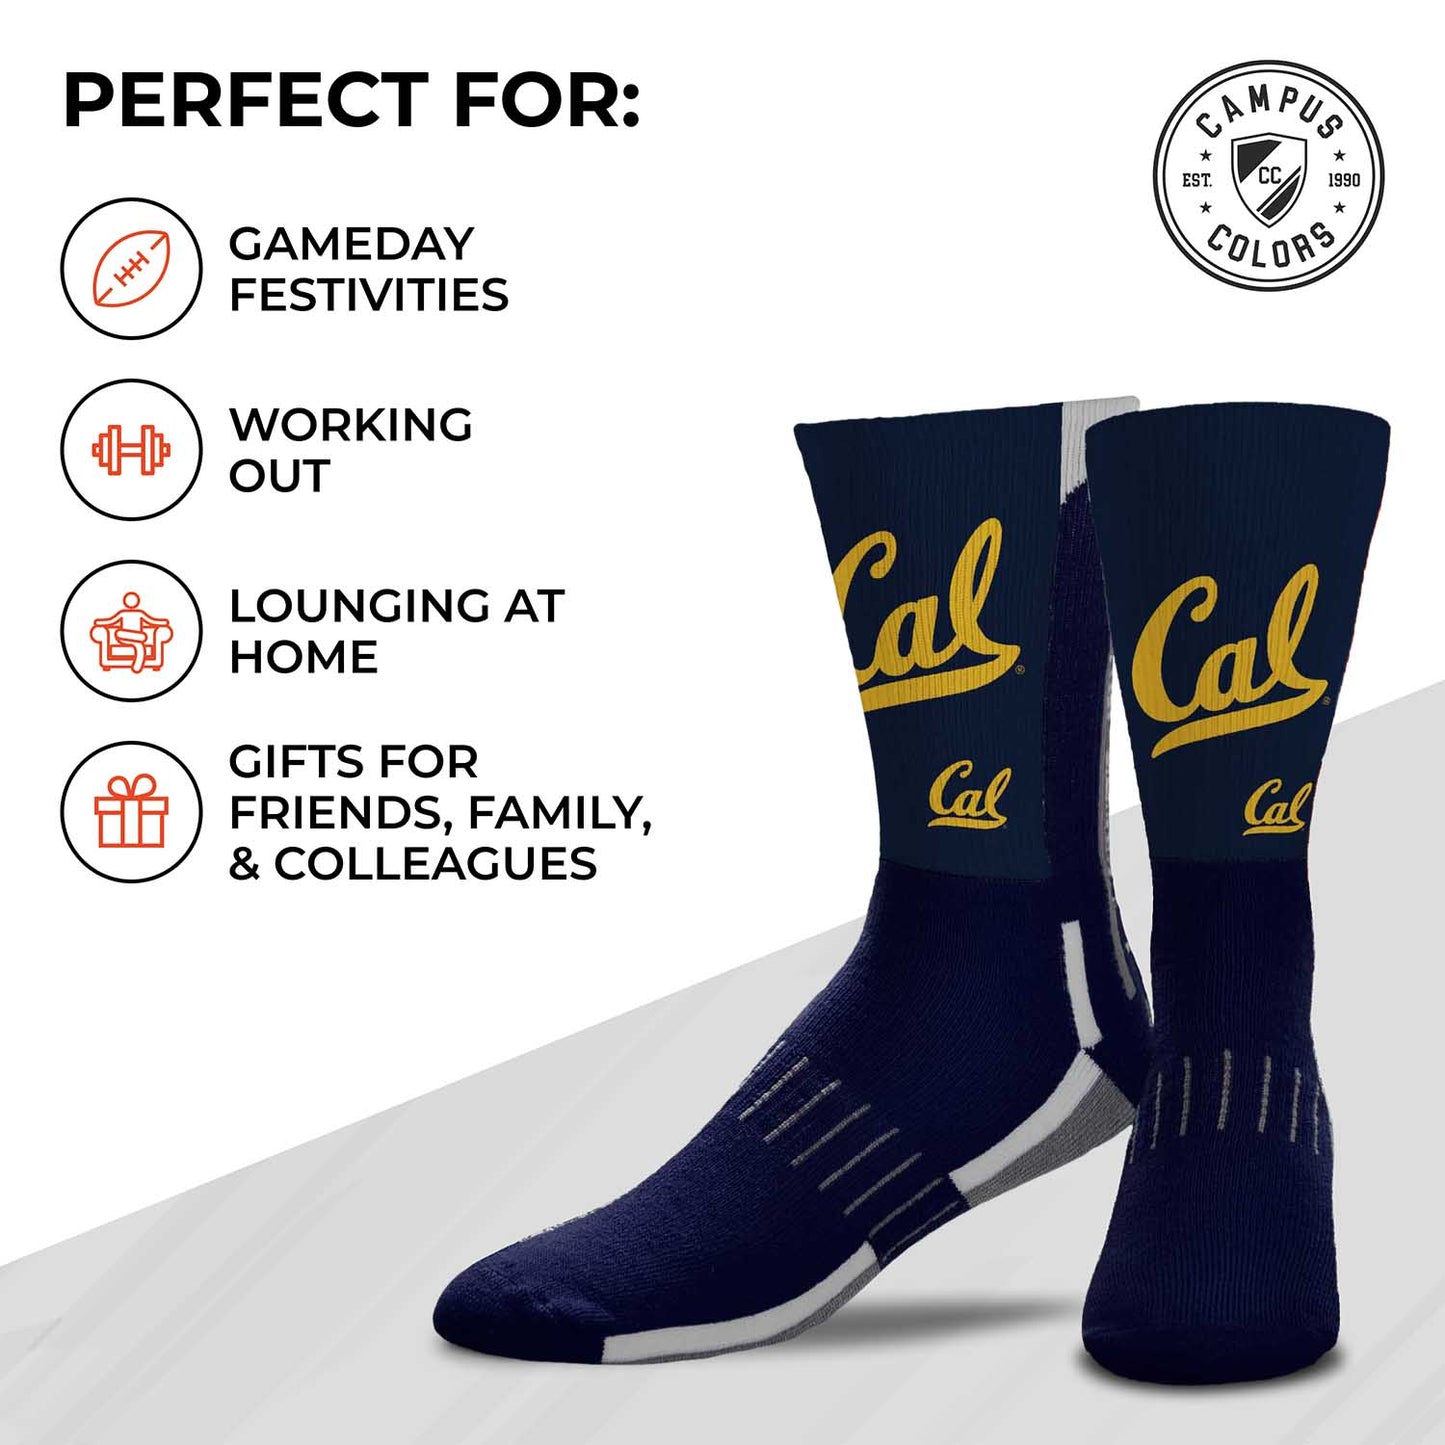 Cal Golden Bears NCAA Adult State and University Crew Socks - Navy